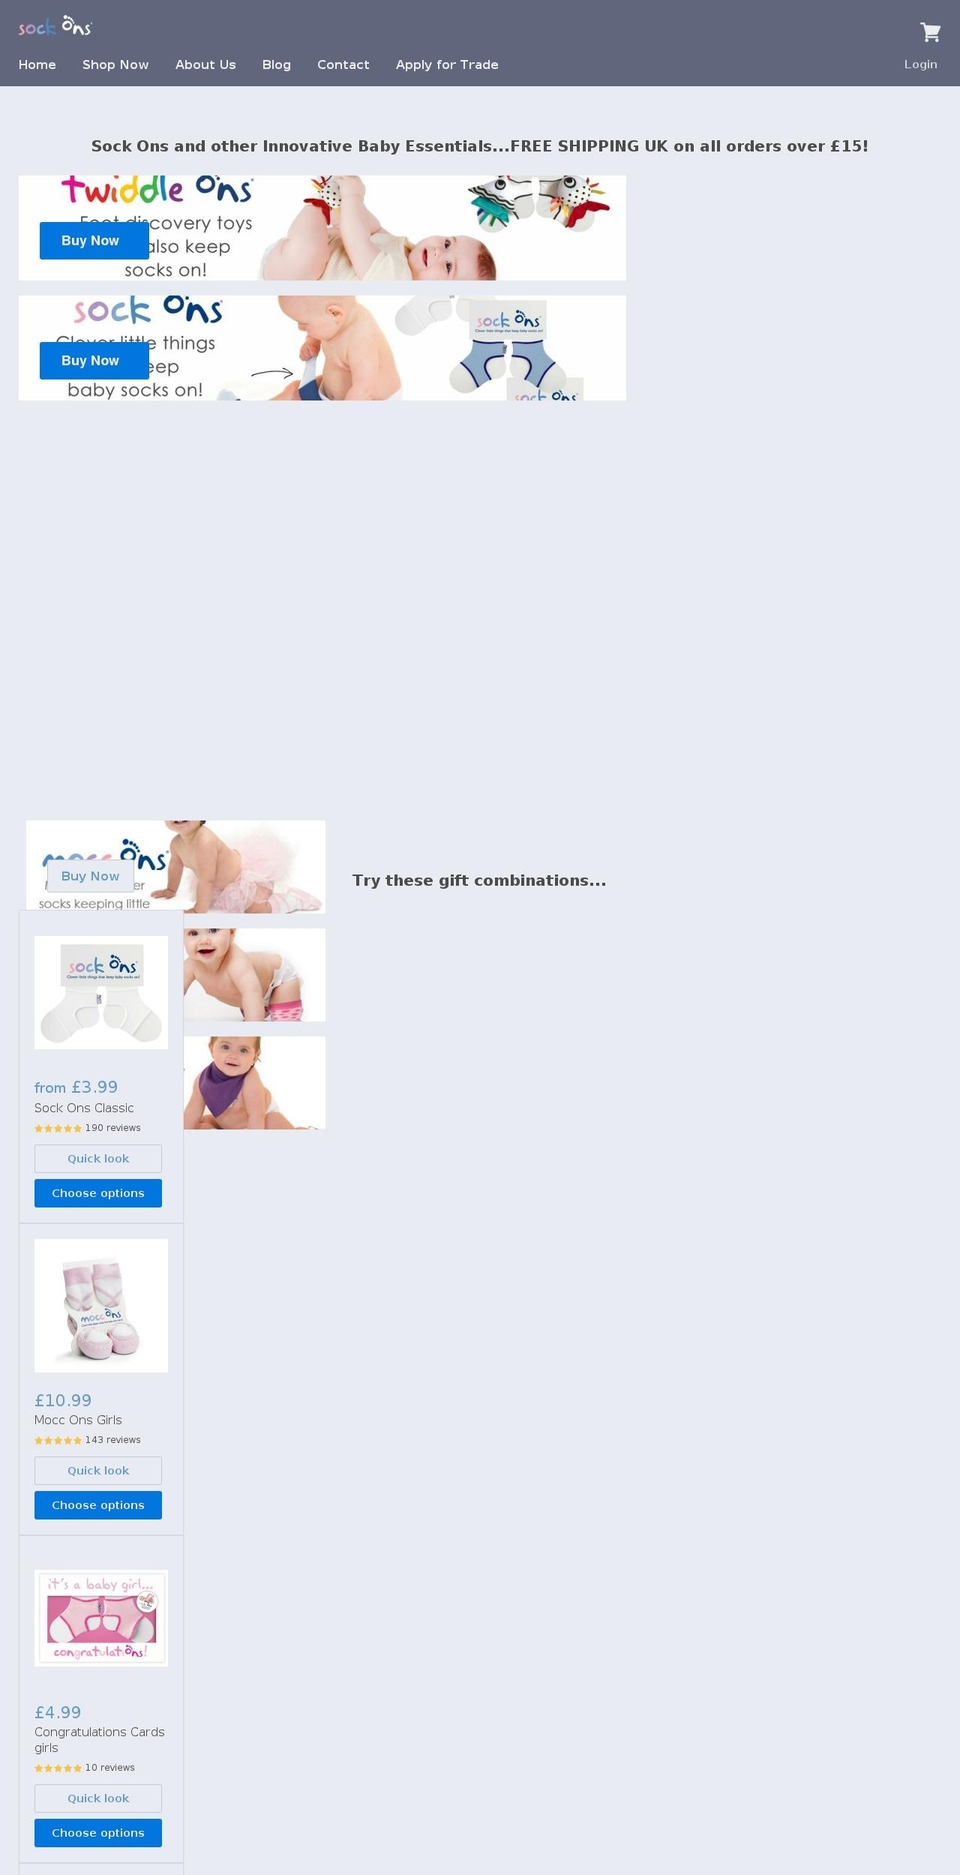 New design May 2018 Shopify theme site example sockons.co.uk